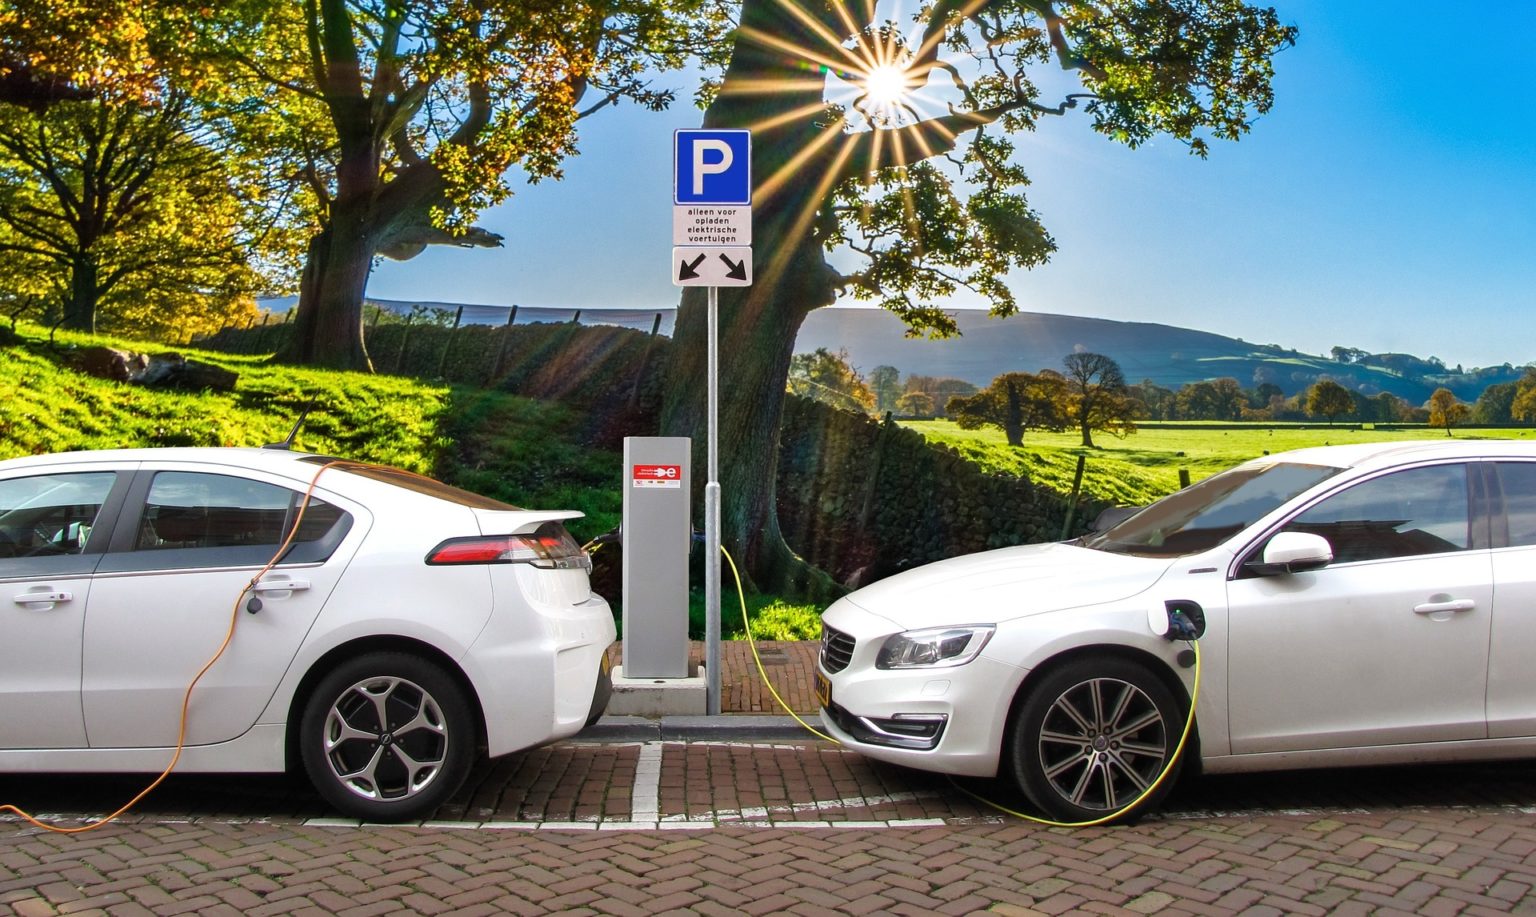 Electric vehicle charging stations coming – Greater New Orleans